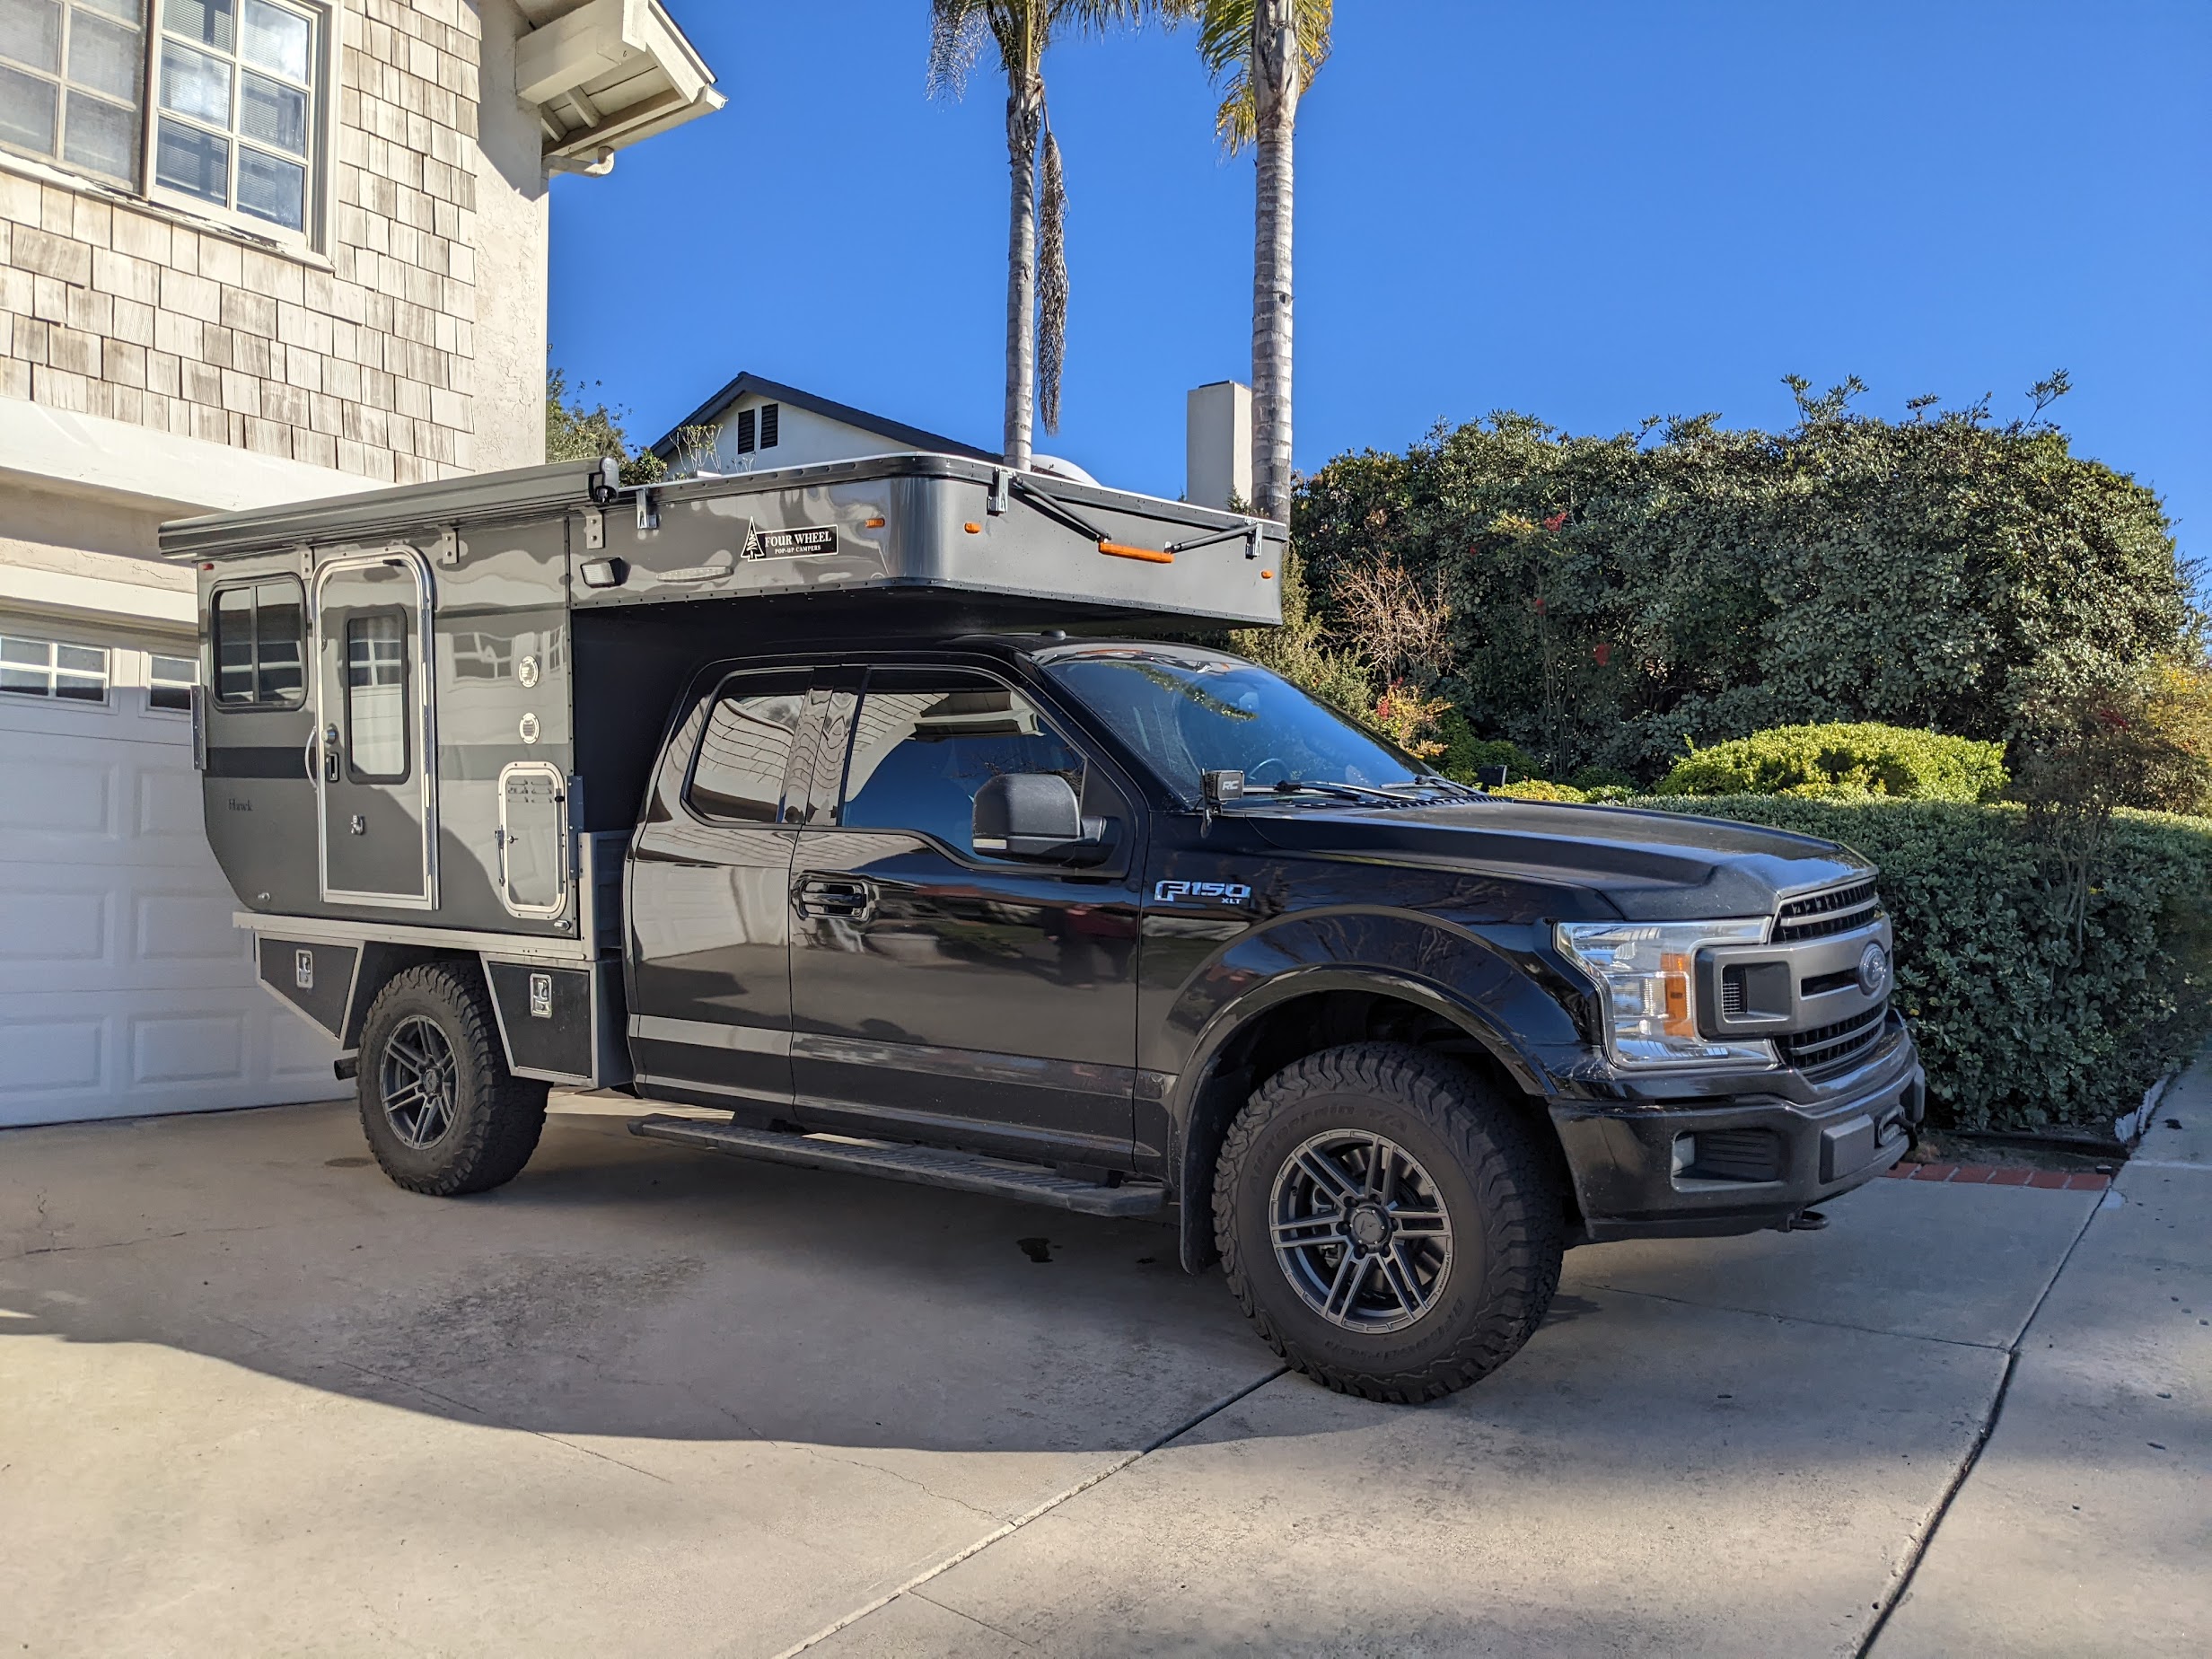 Overland Classifieds :: 2018 Ford F150 XLT 4X4 with 2020 FWC Hawk Flatbed -  Expedition Portal